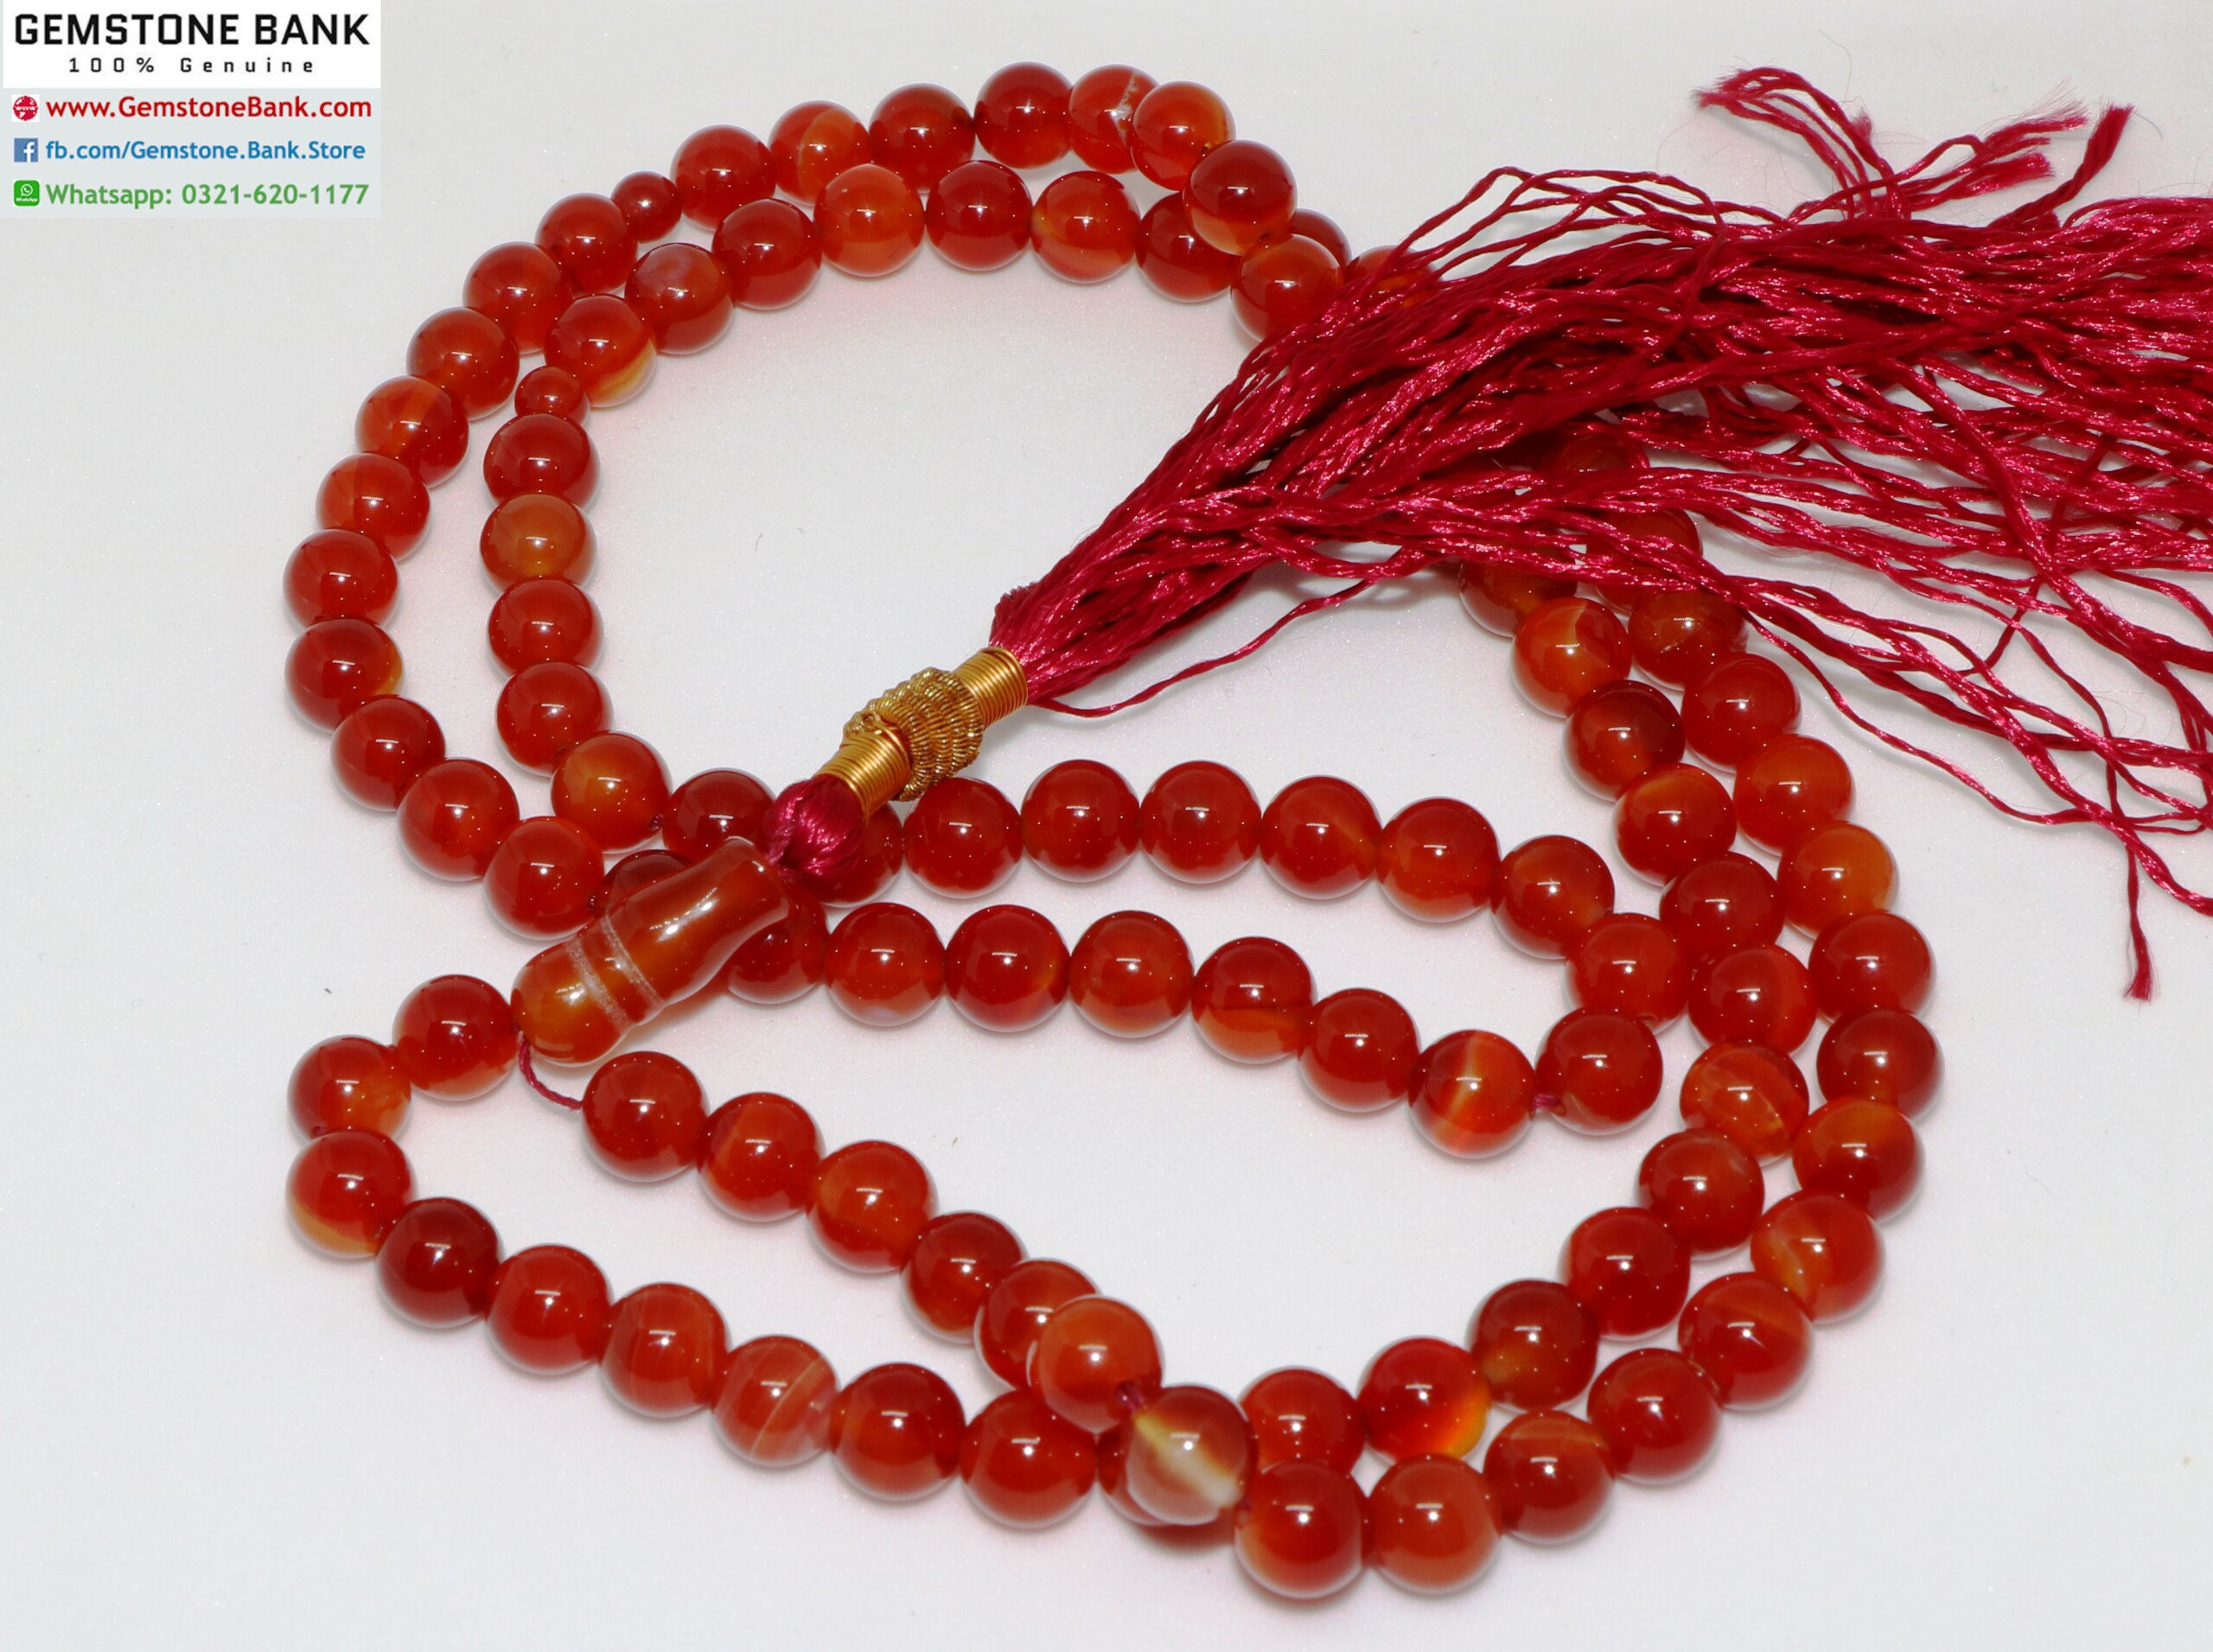 red agate benefits